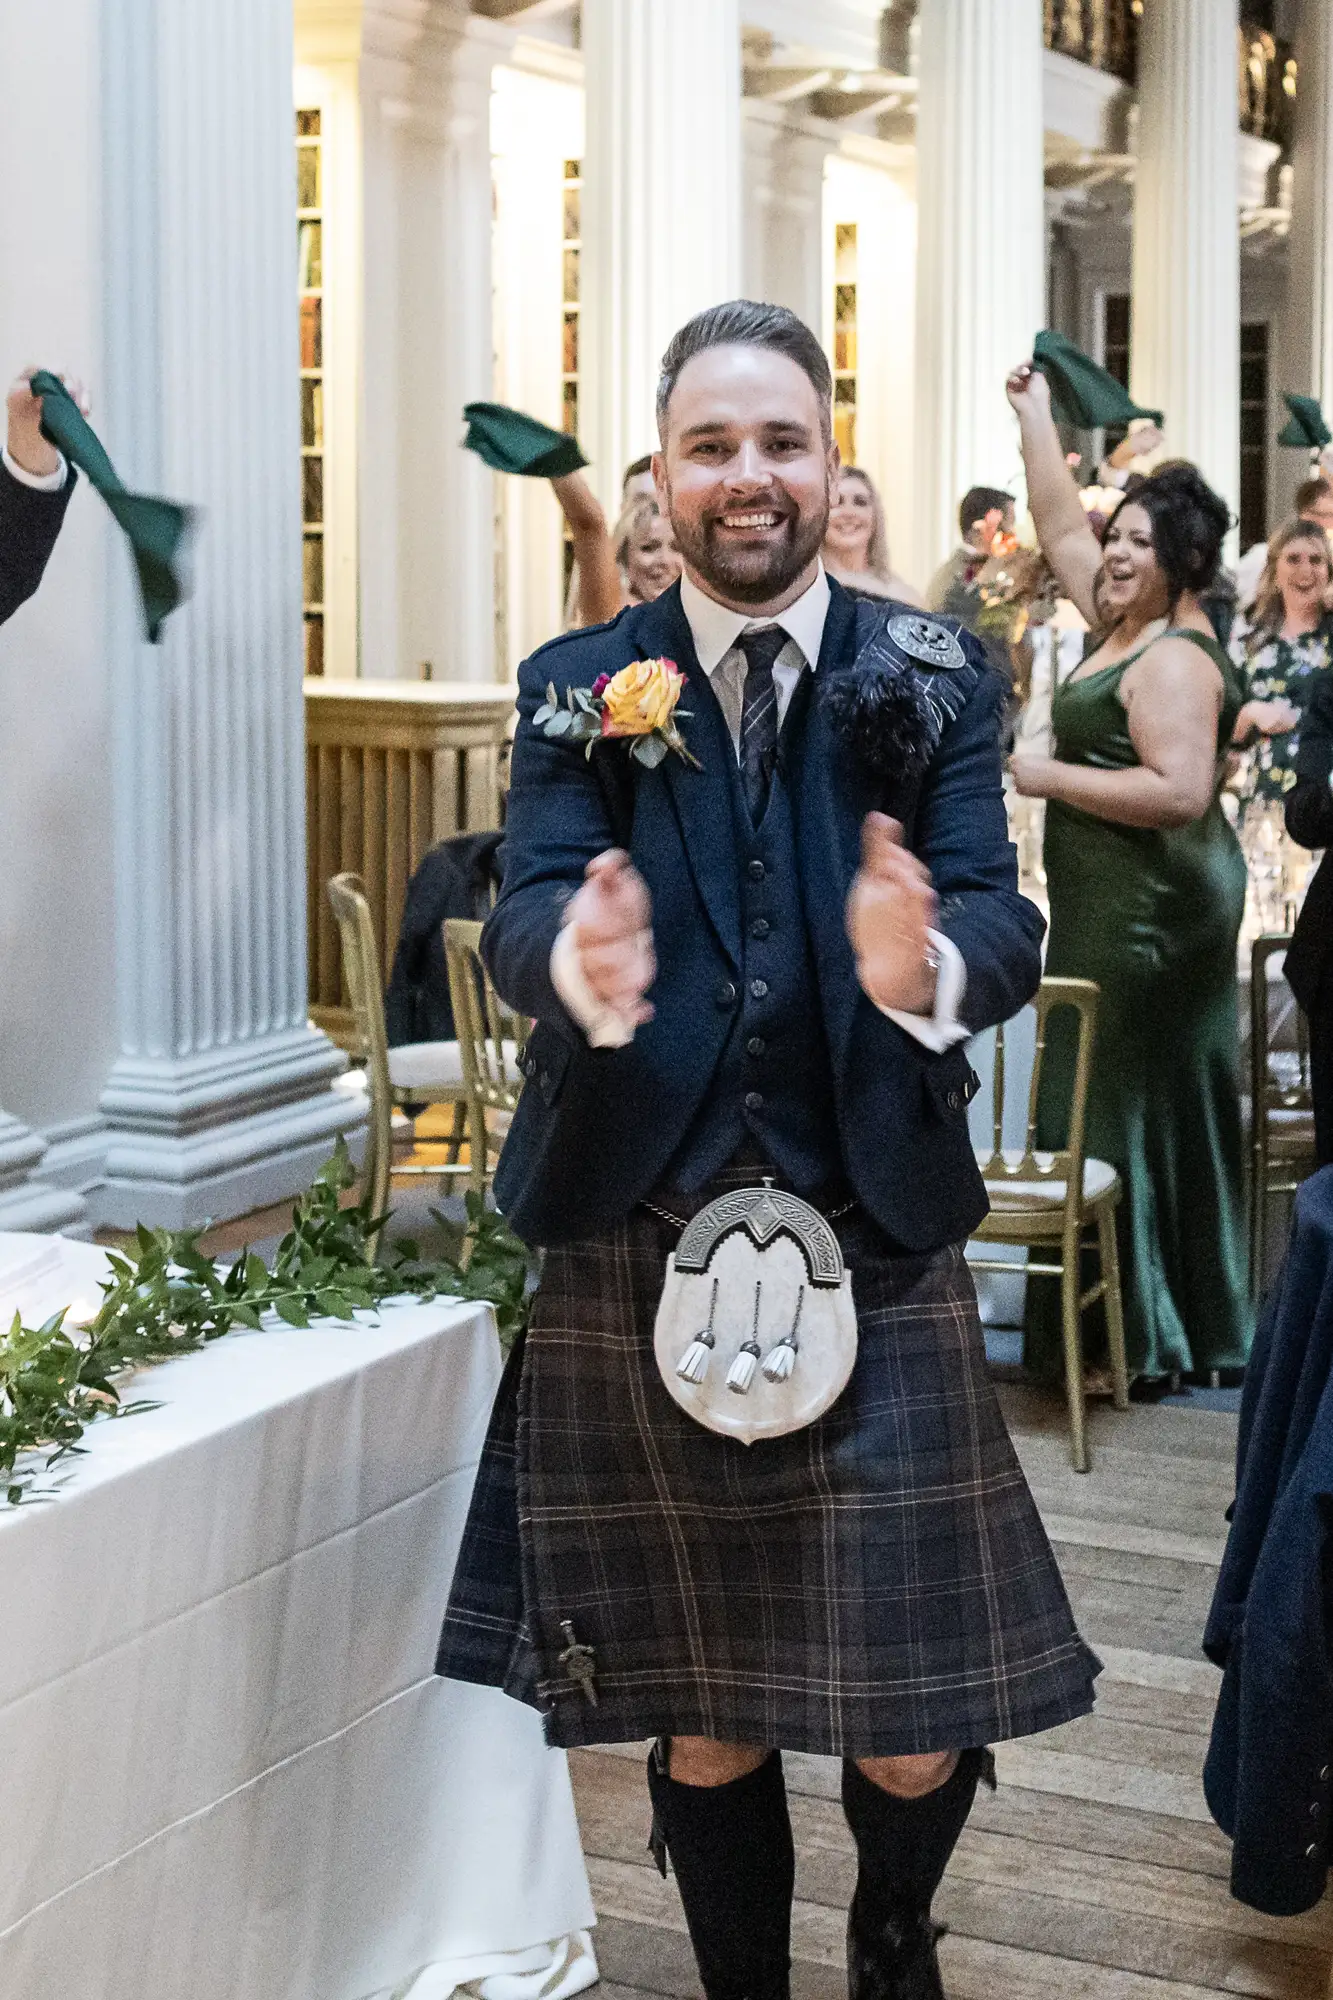 A smiling man in a traditional scottish outfit, including a kilt and sporran, walks enthusiastically down an aisle as guests applaud.